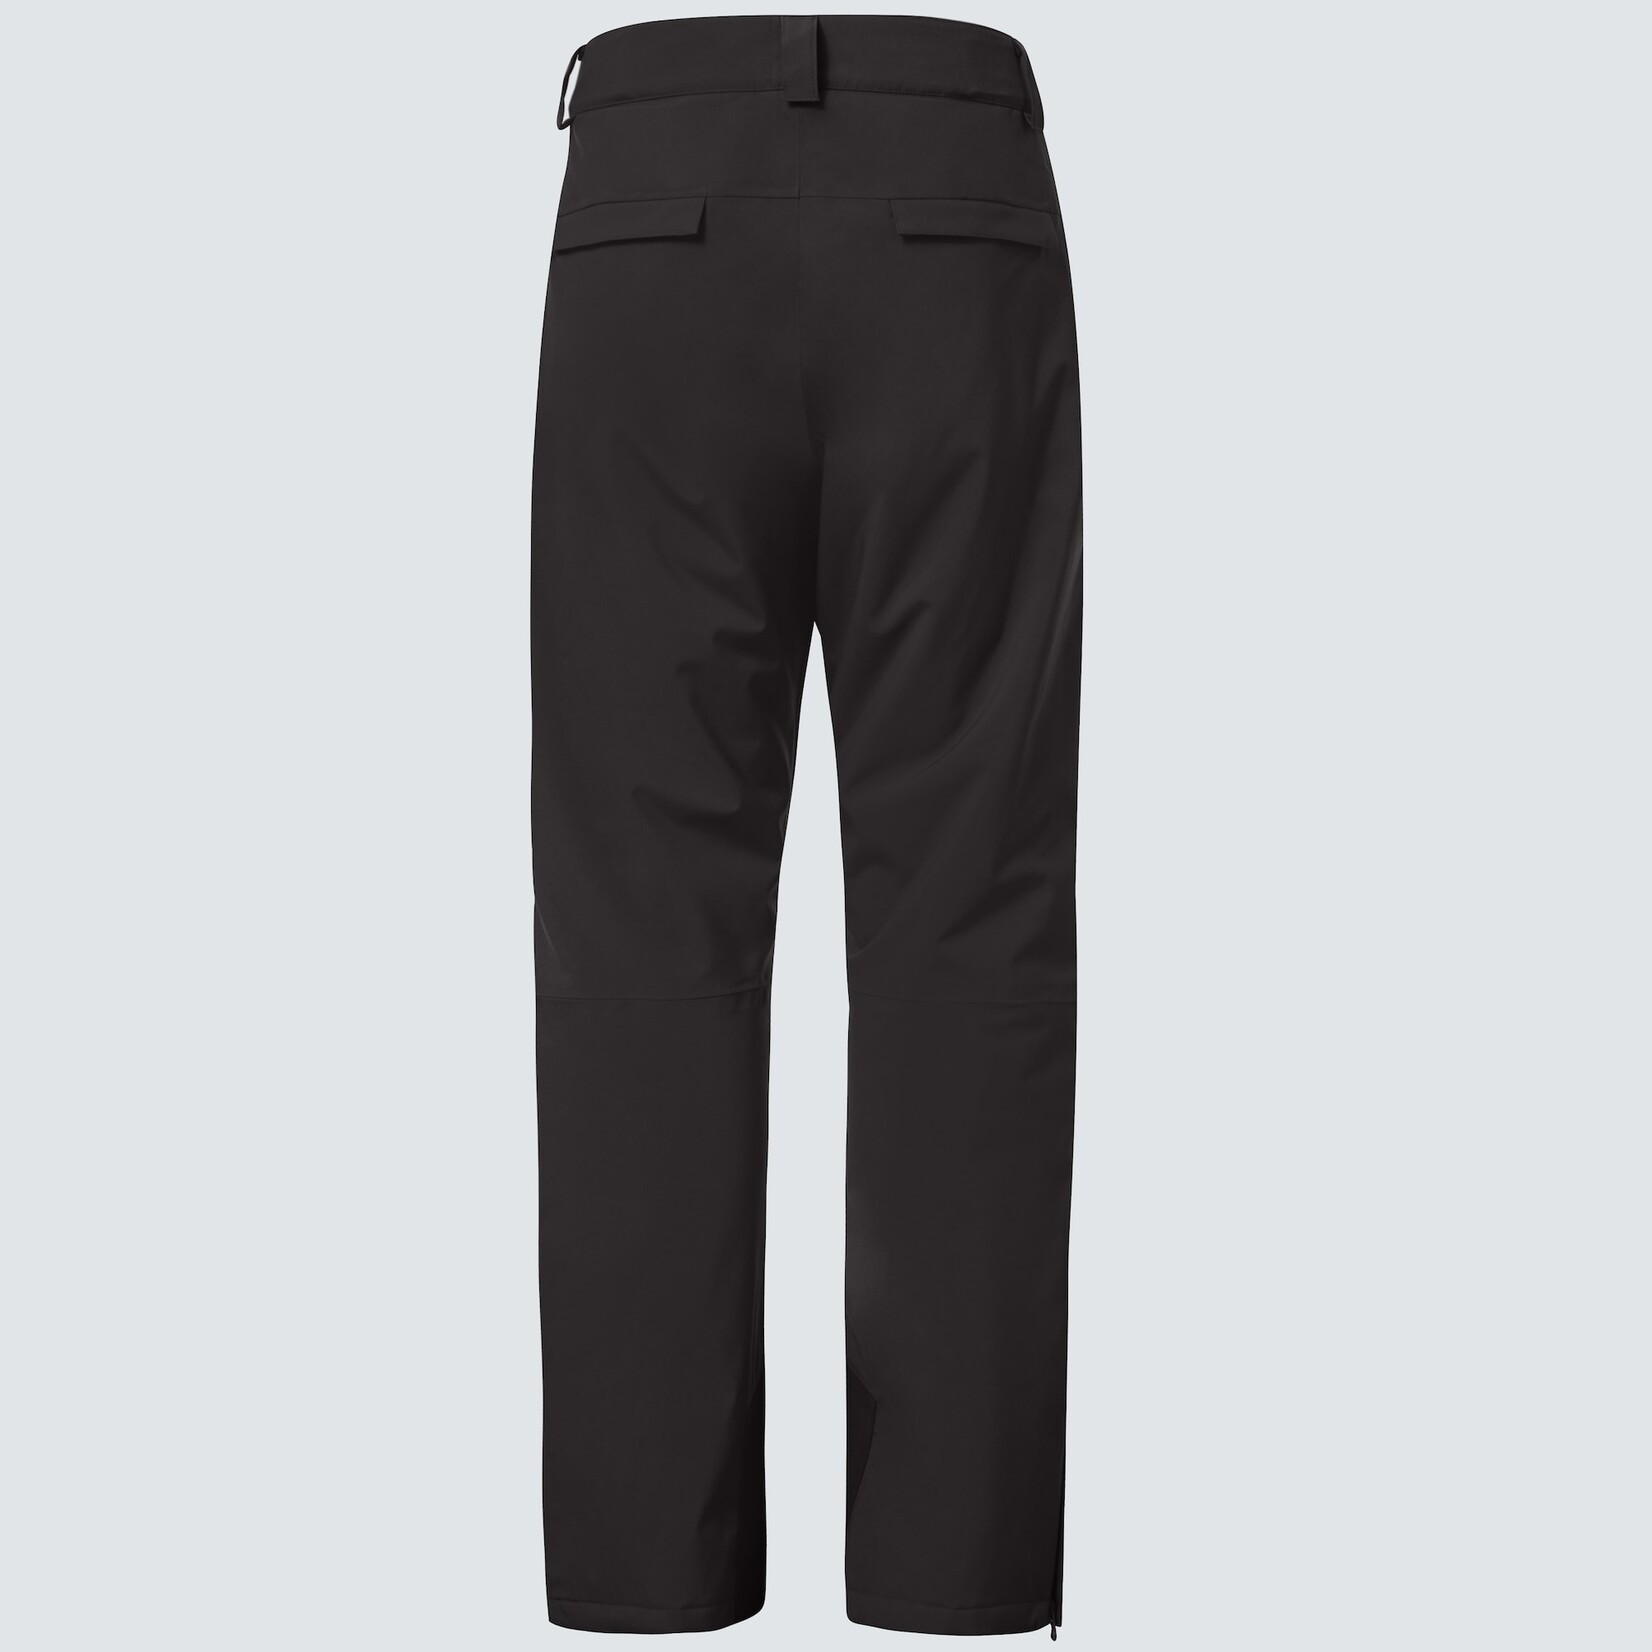 OAKLEY AXIS INSULATED PANT - 23/24